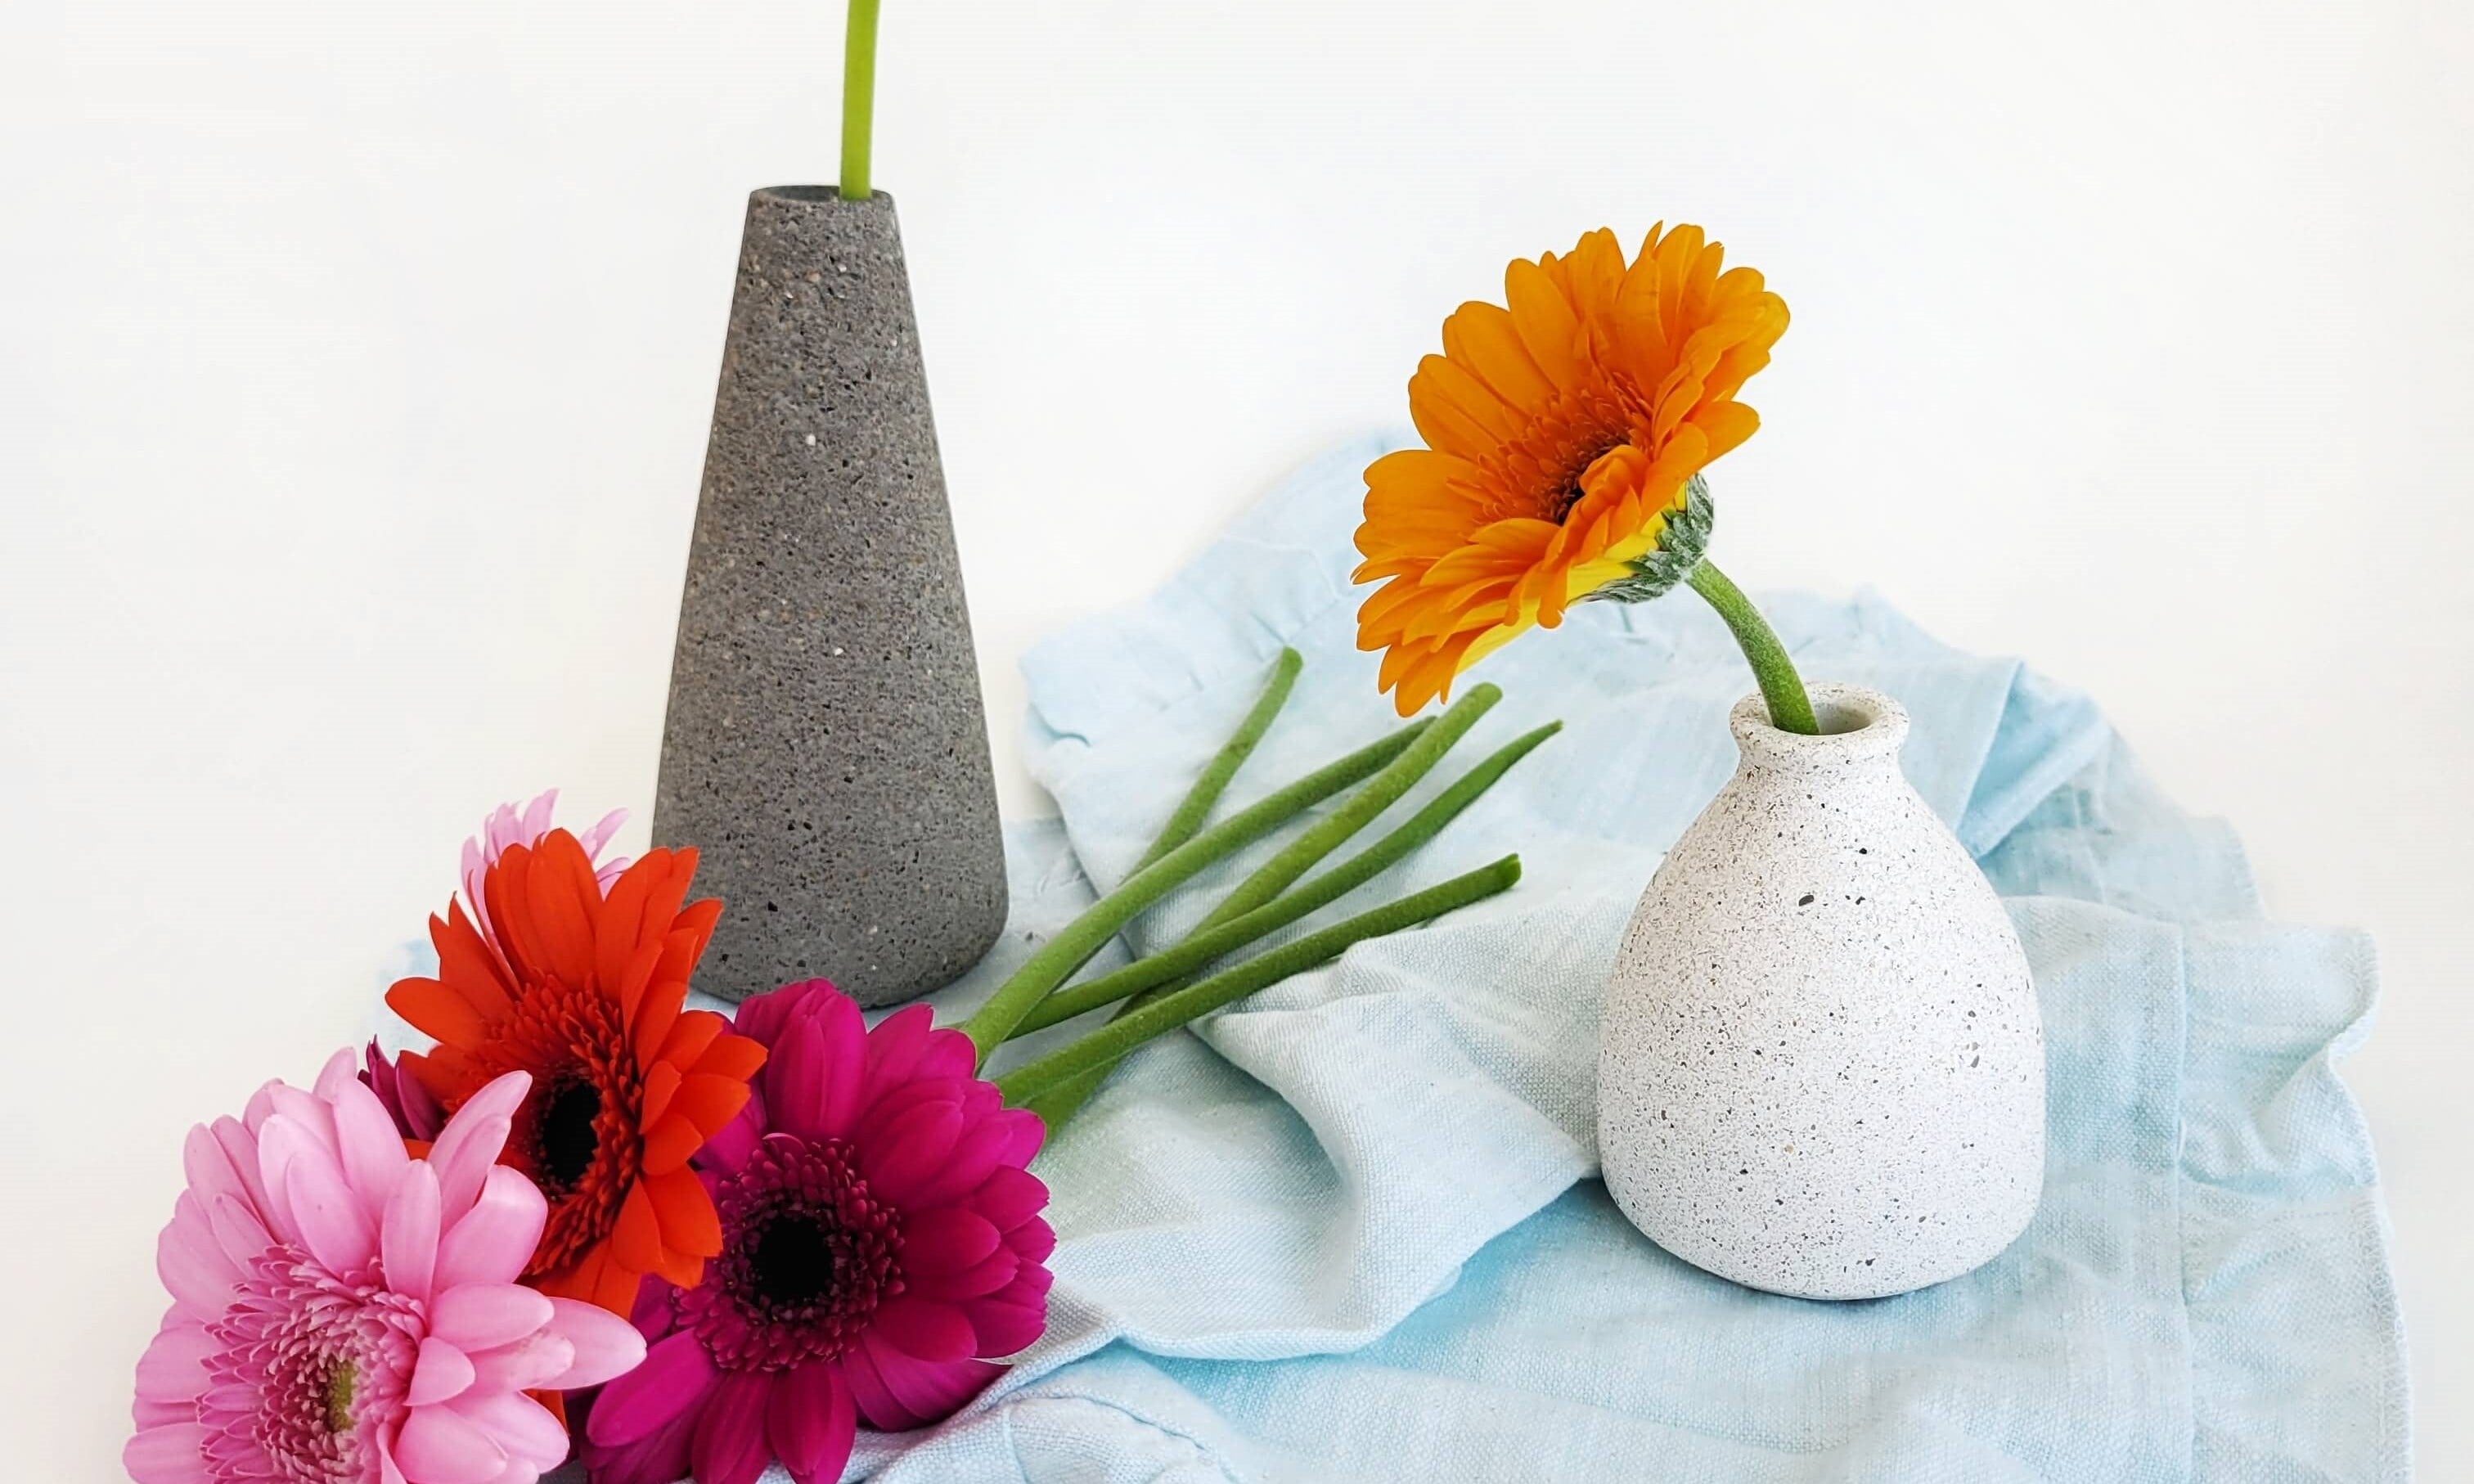 Stone Vases with Flowers: One White, One Grey - Vibrant Floral Decor